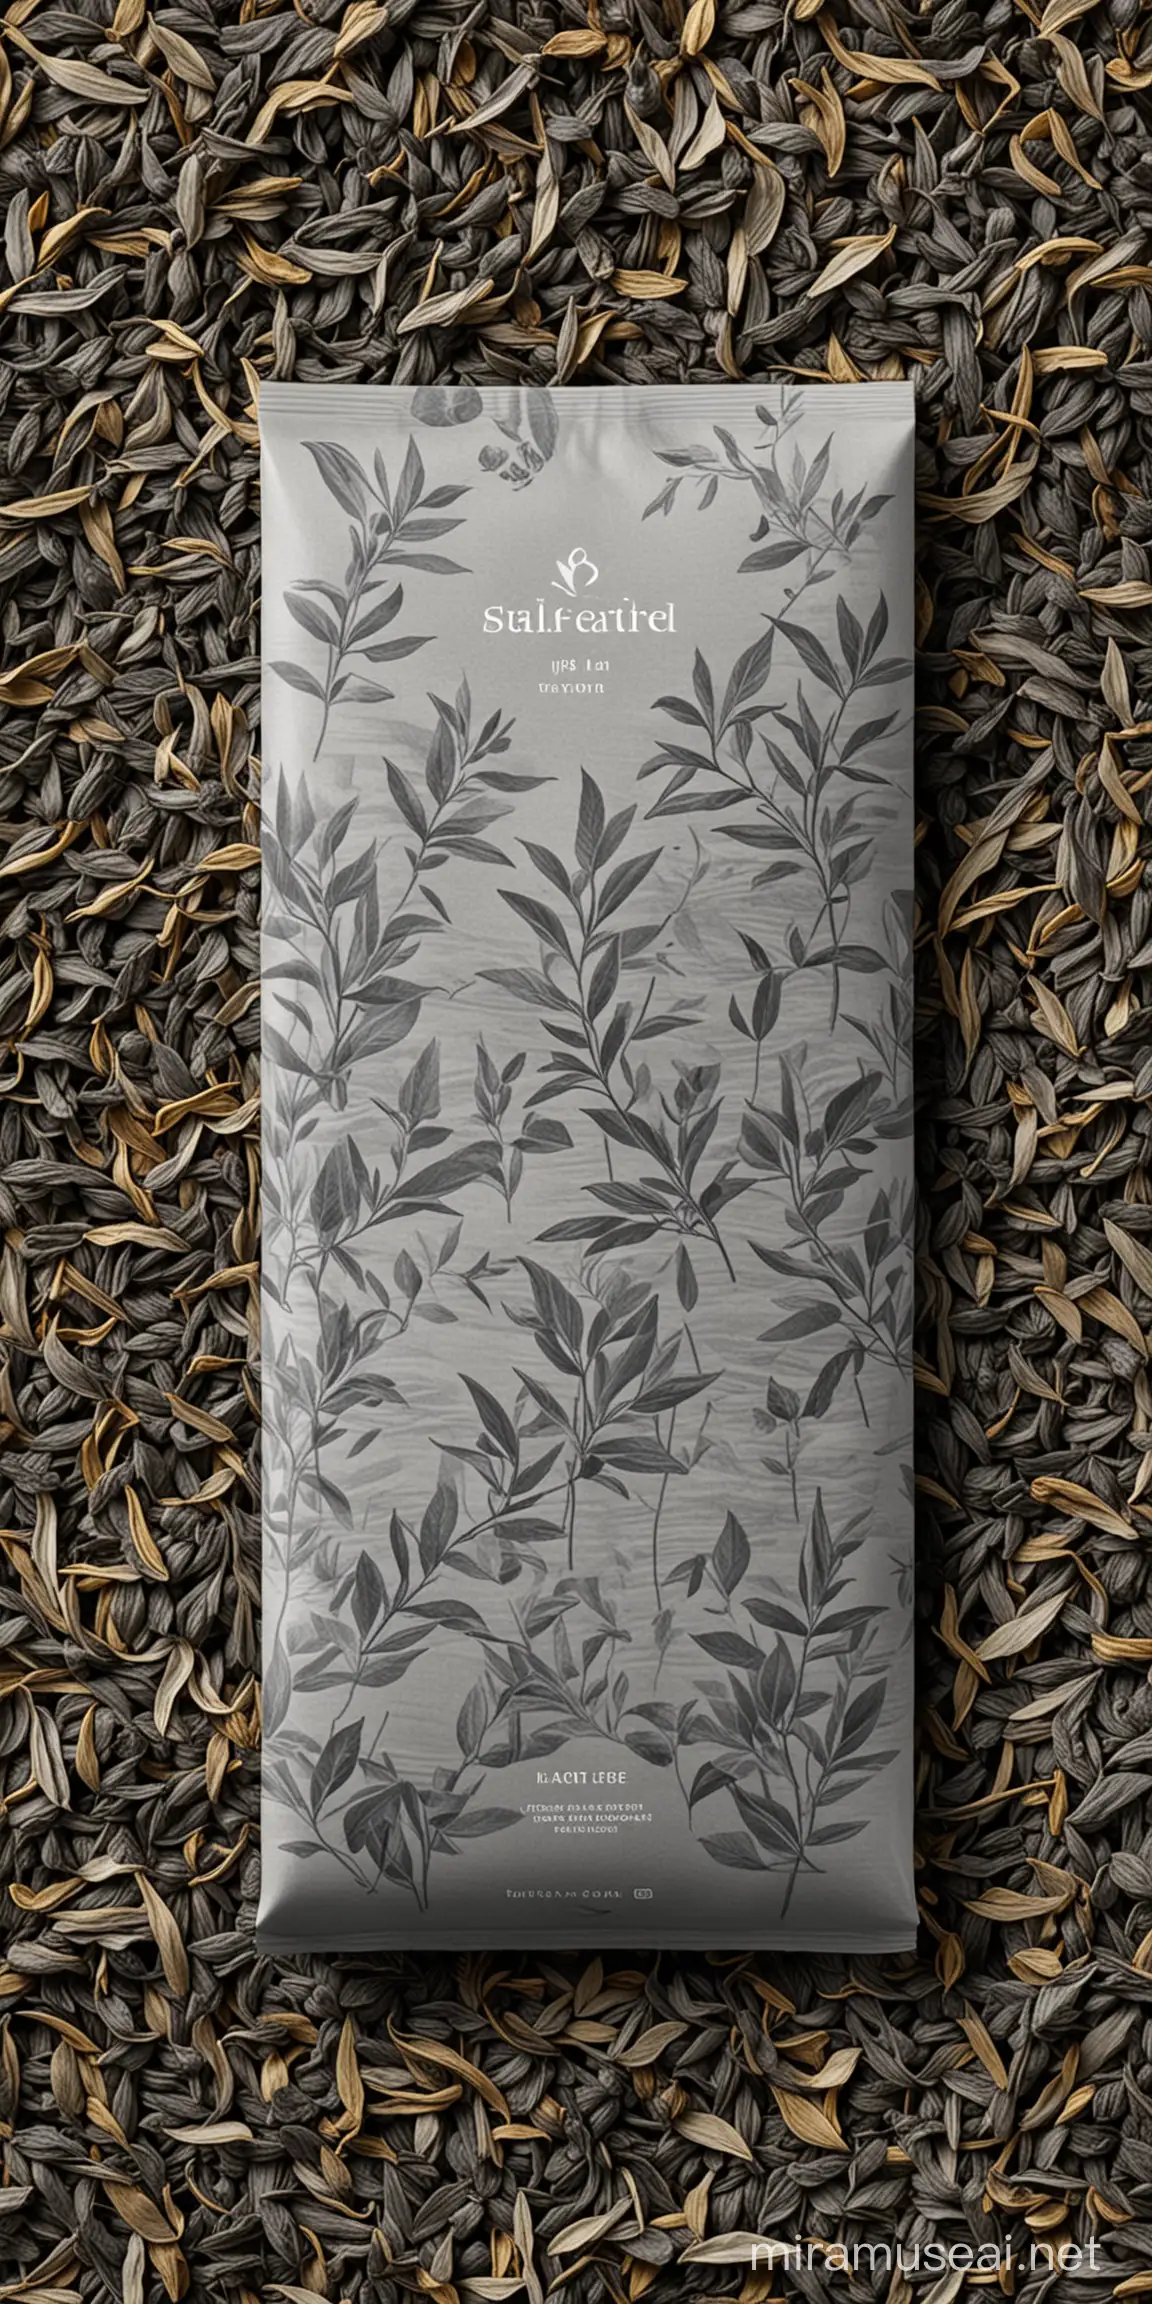 a backdrop for a tea pack, grey tea leaves take 70% of the image,  2D lines, low quality printing